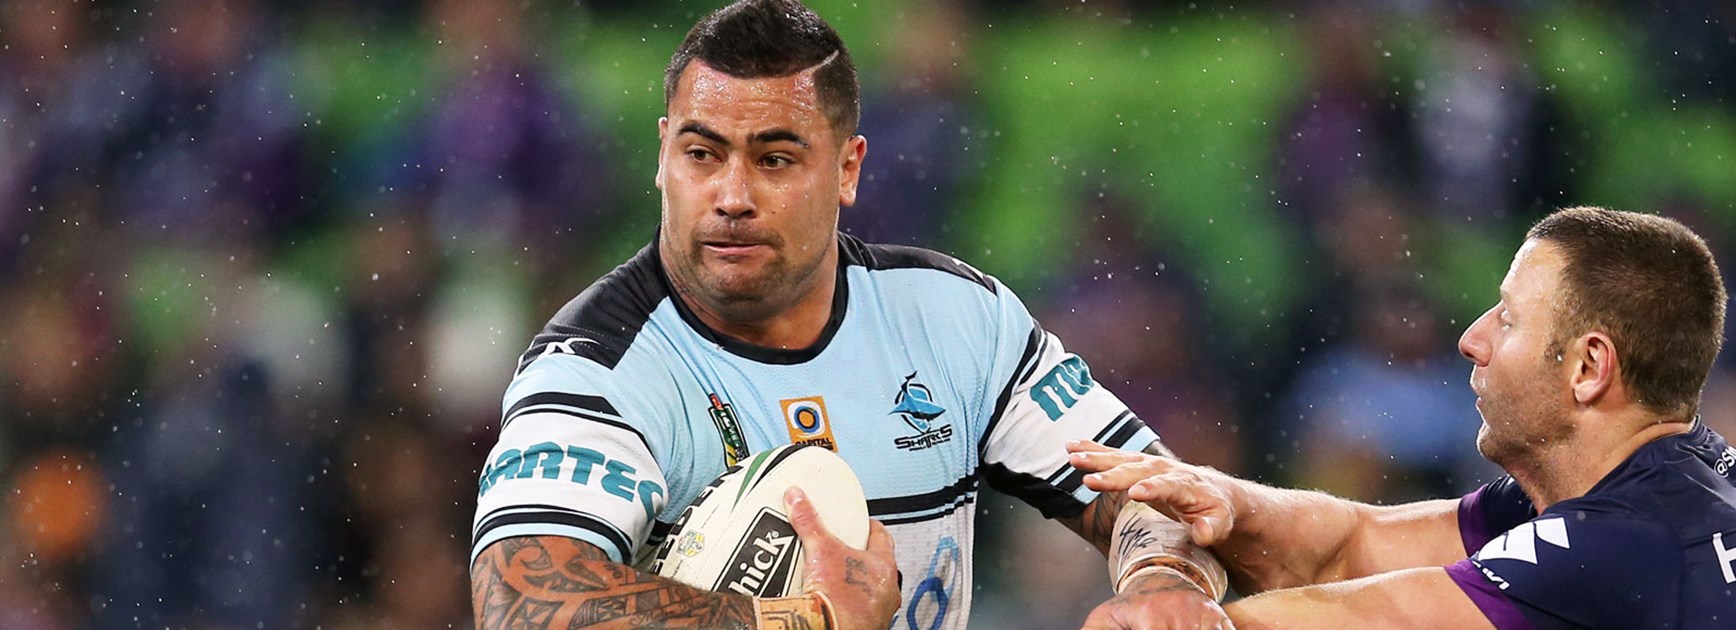 Sharks prop Andrew Fifita against the Storm in Round 26.